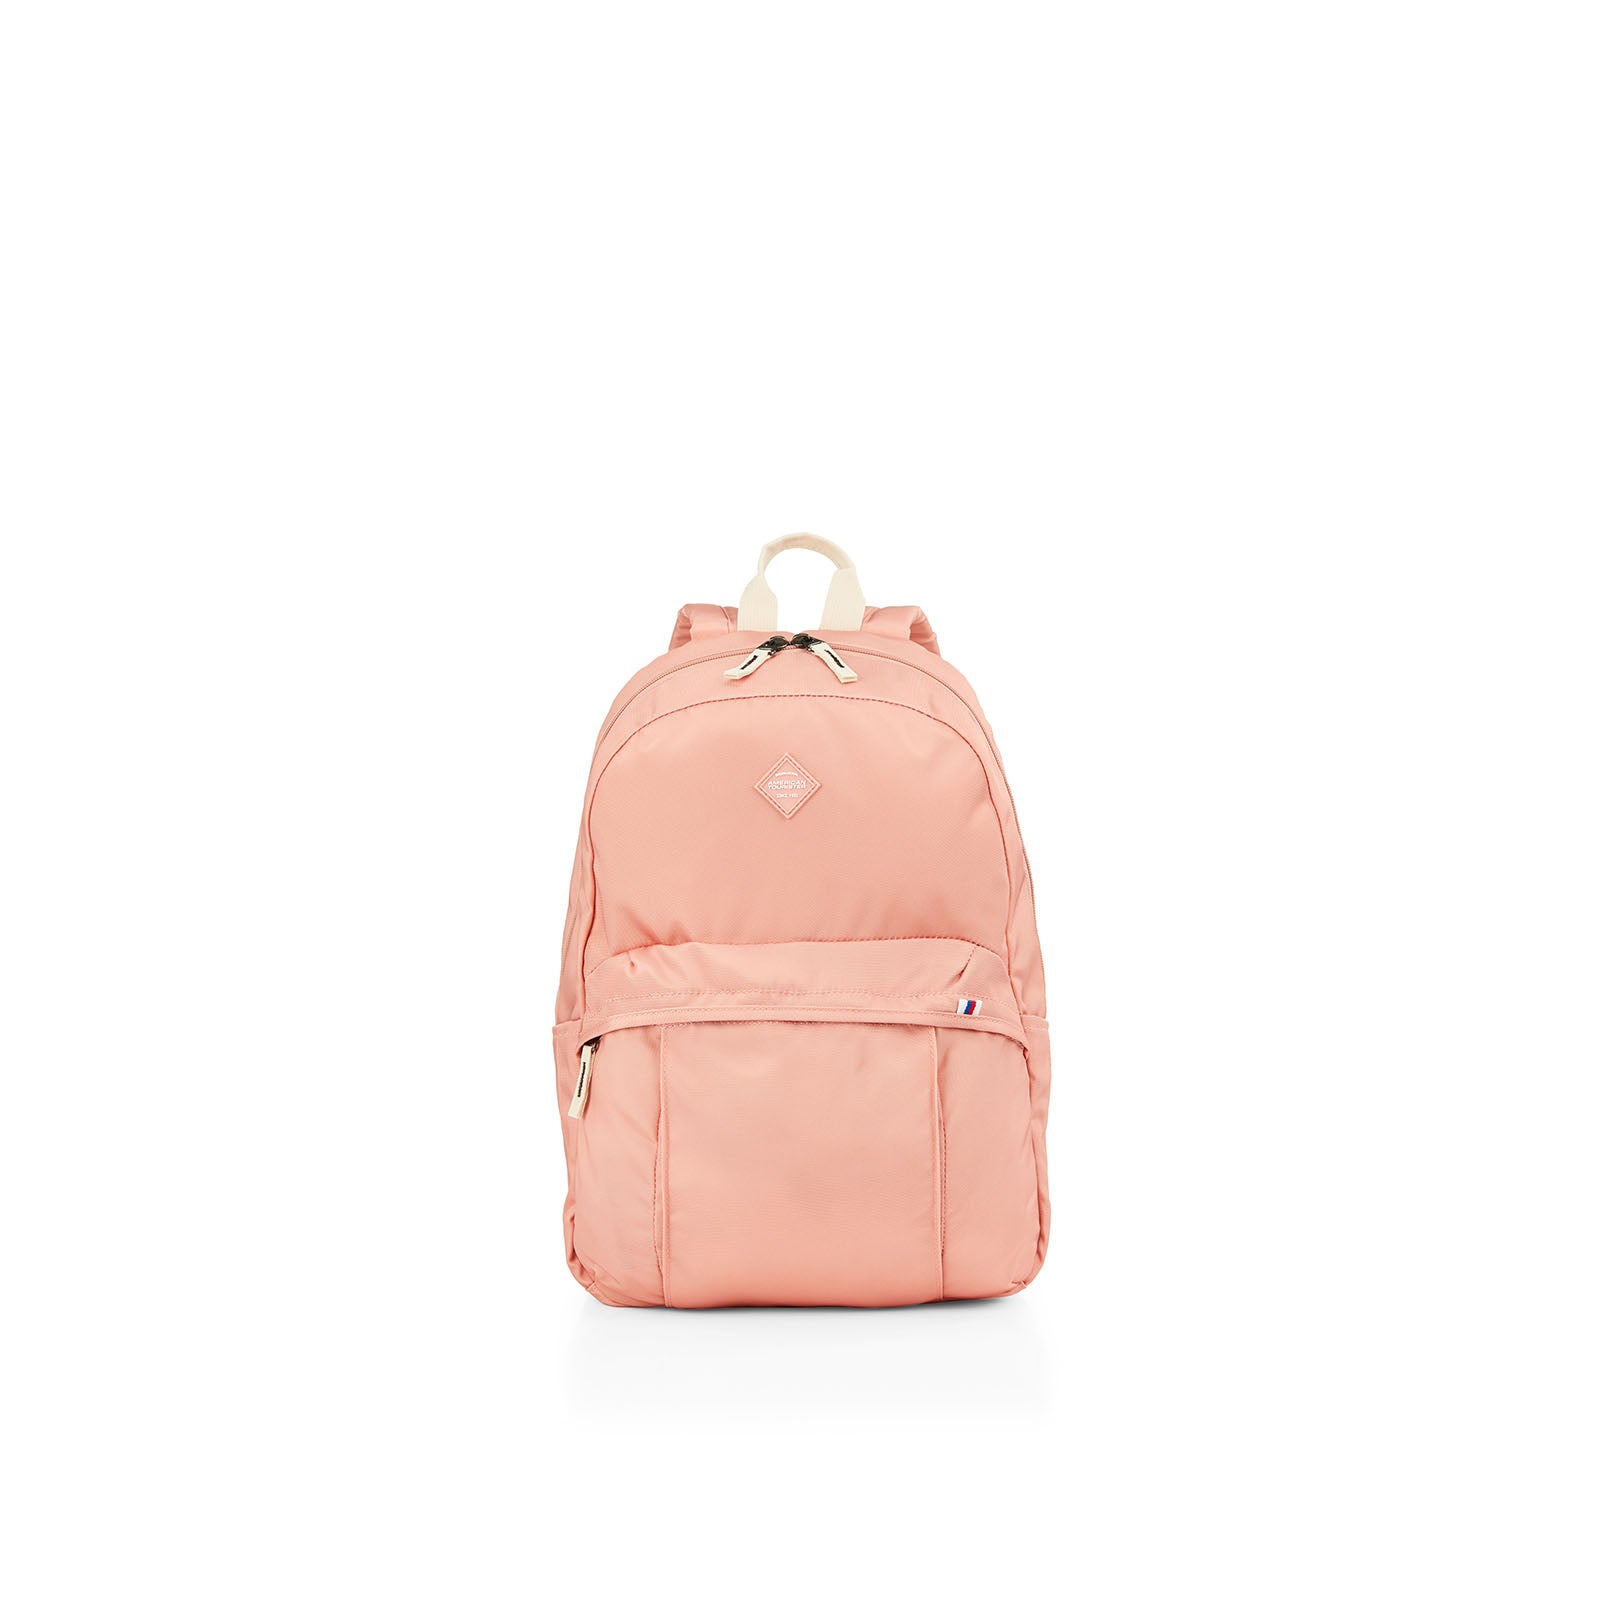 American-Tourister-Rudy-Everyday-Backpack-Apricot-Ice-Front